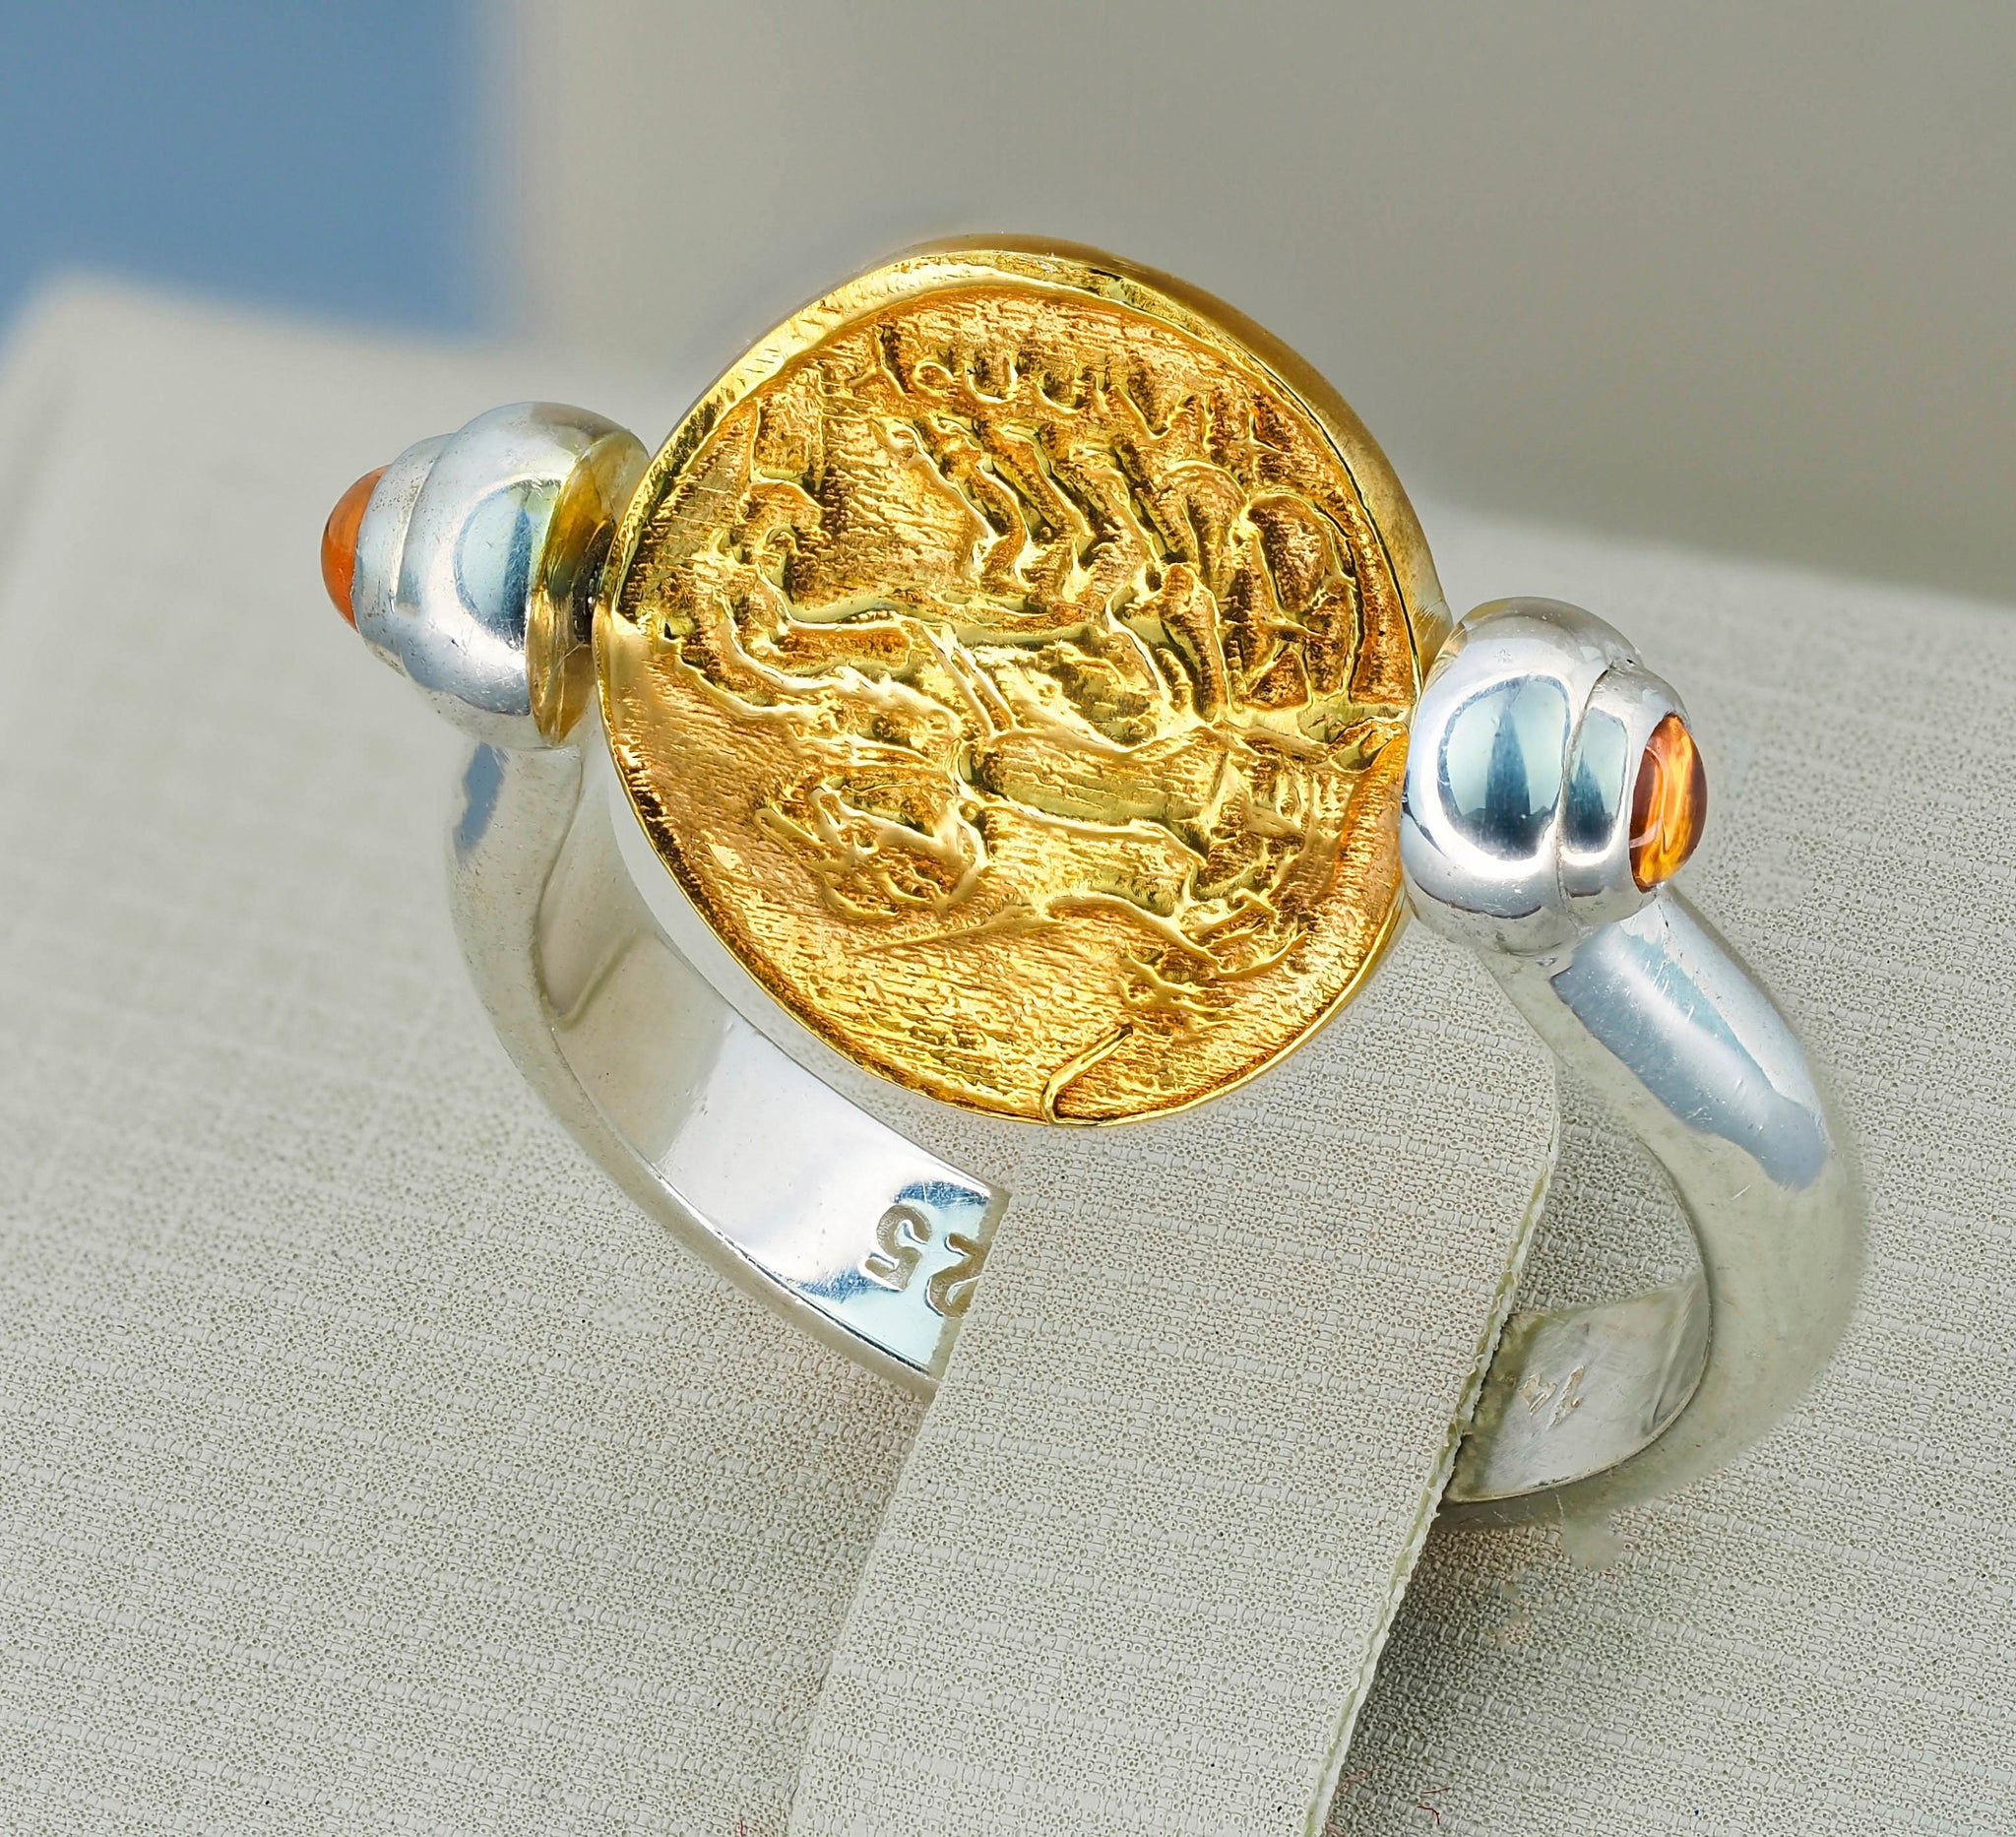 FREE SIZE Omer Turkish Roman Art Angel Coin Ring 925 K Sterling Silver